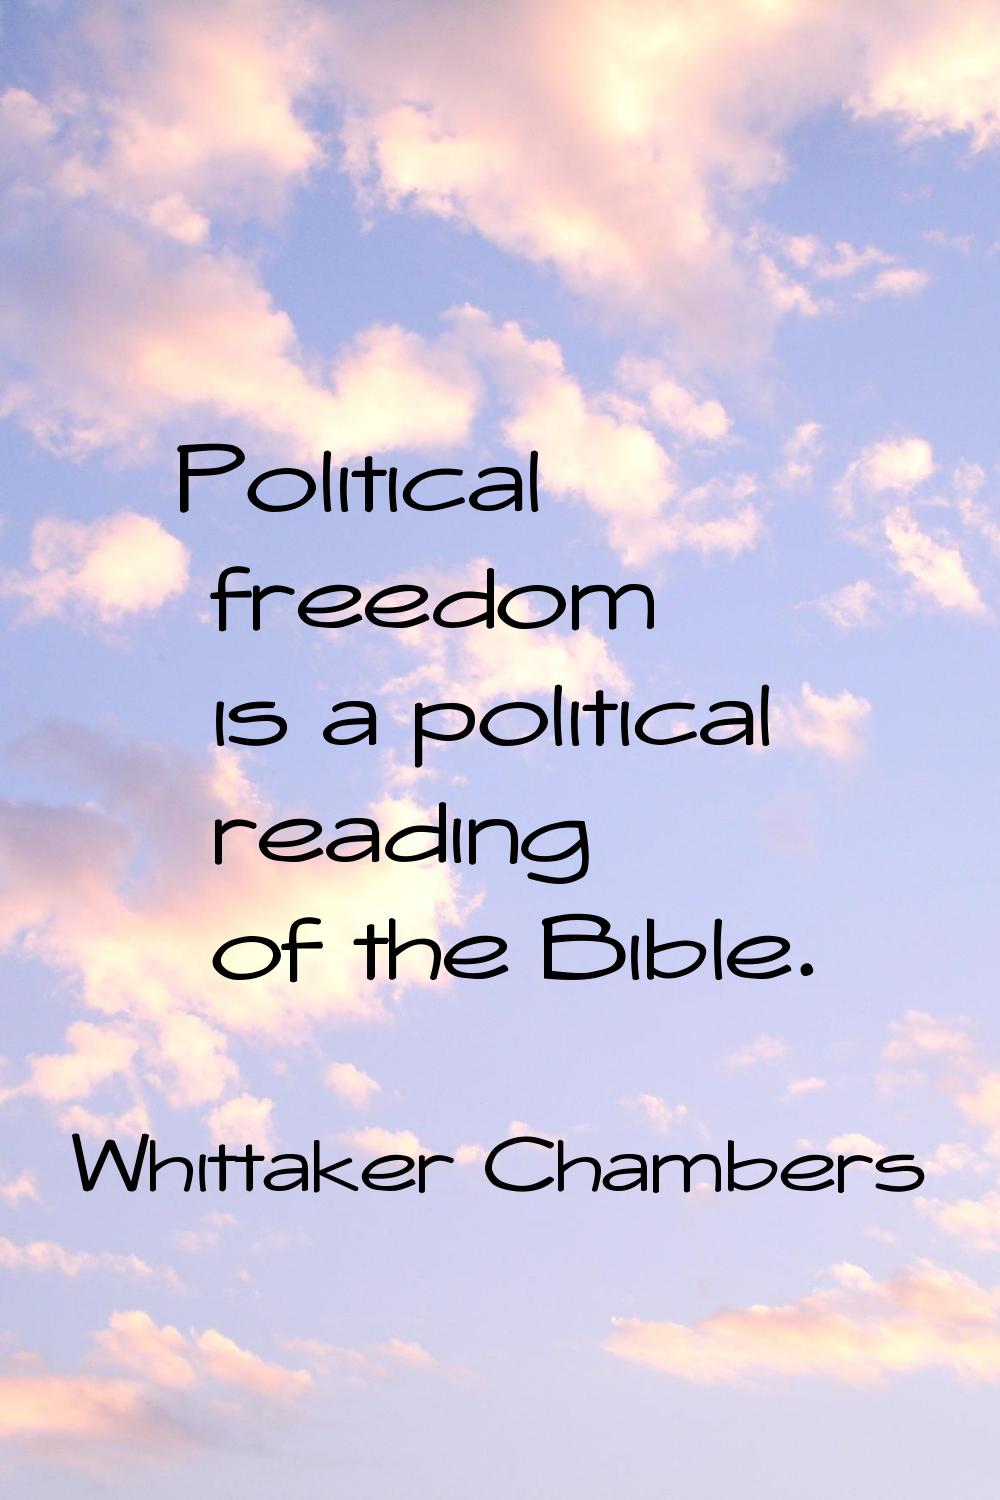 Political freedom is a political reading of the Bible.